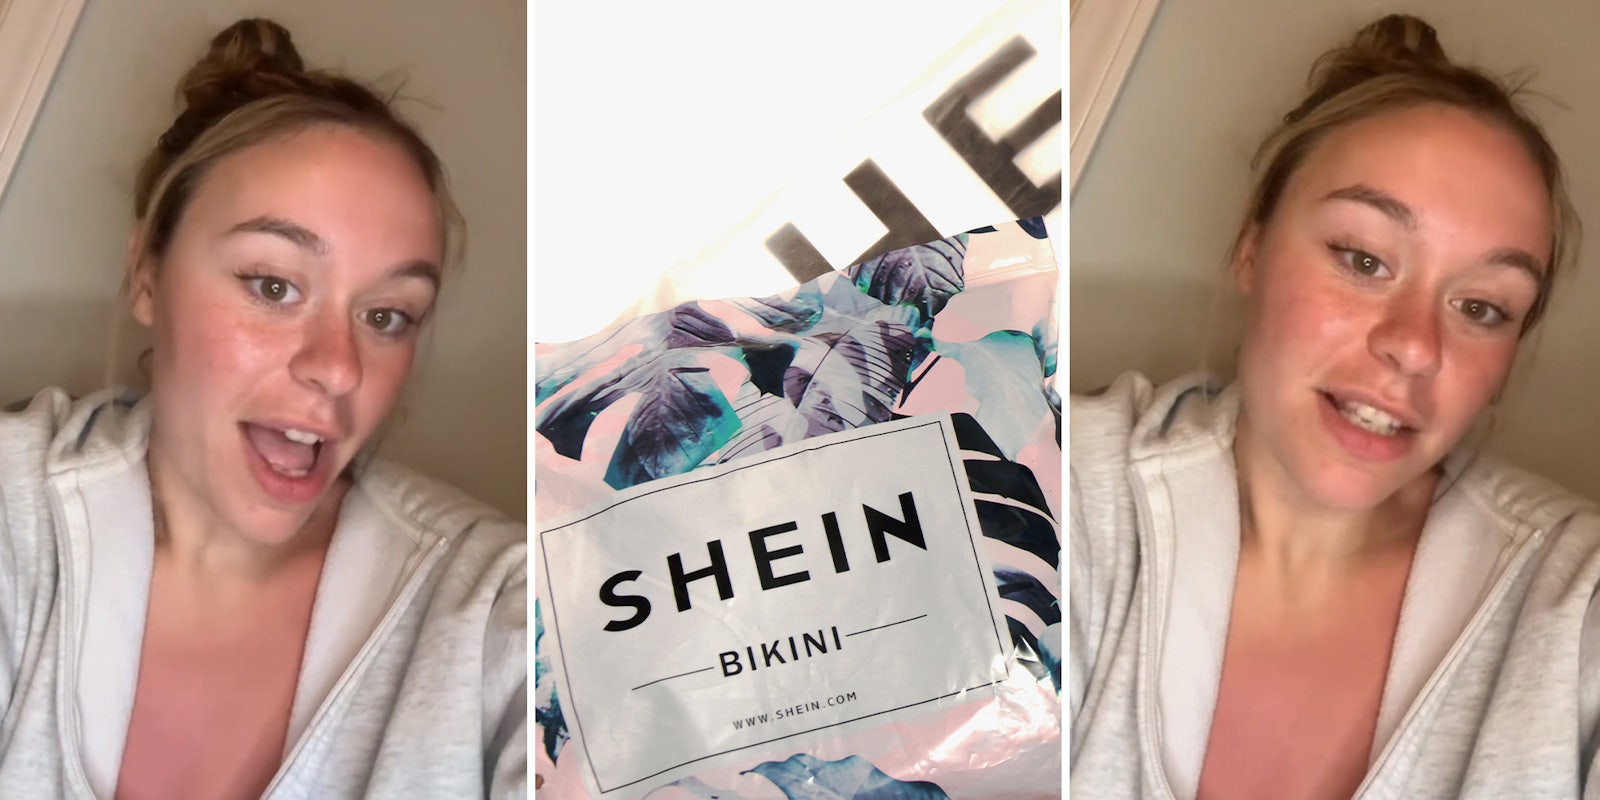 Woman says she caught big boutique reselling Shein clothes